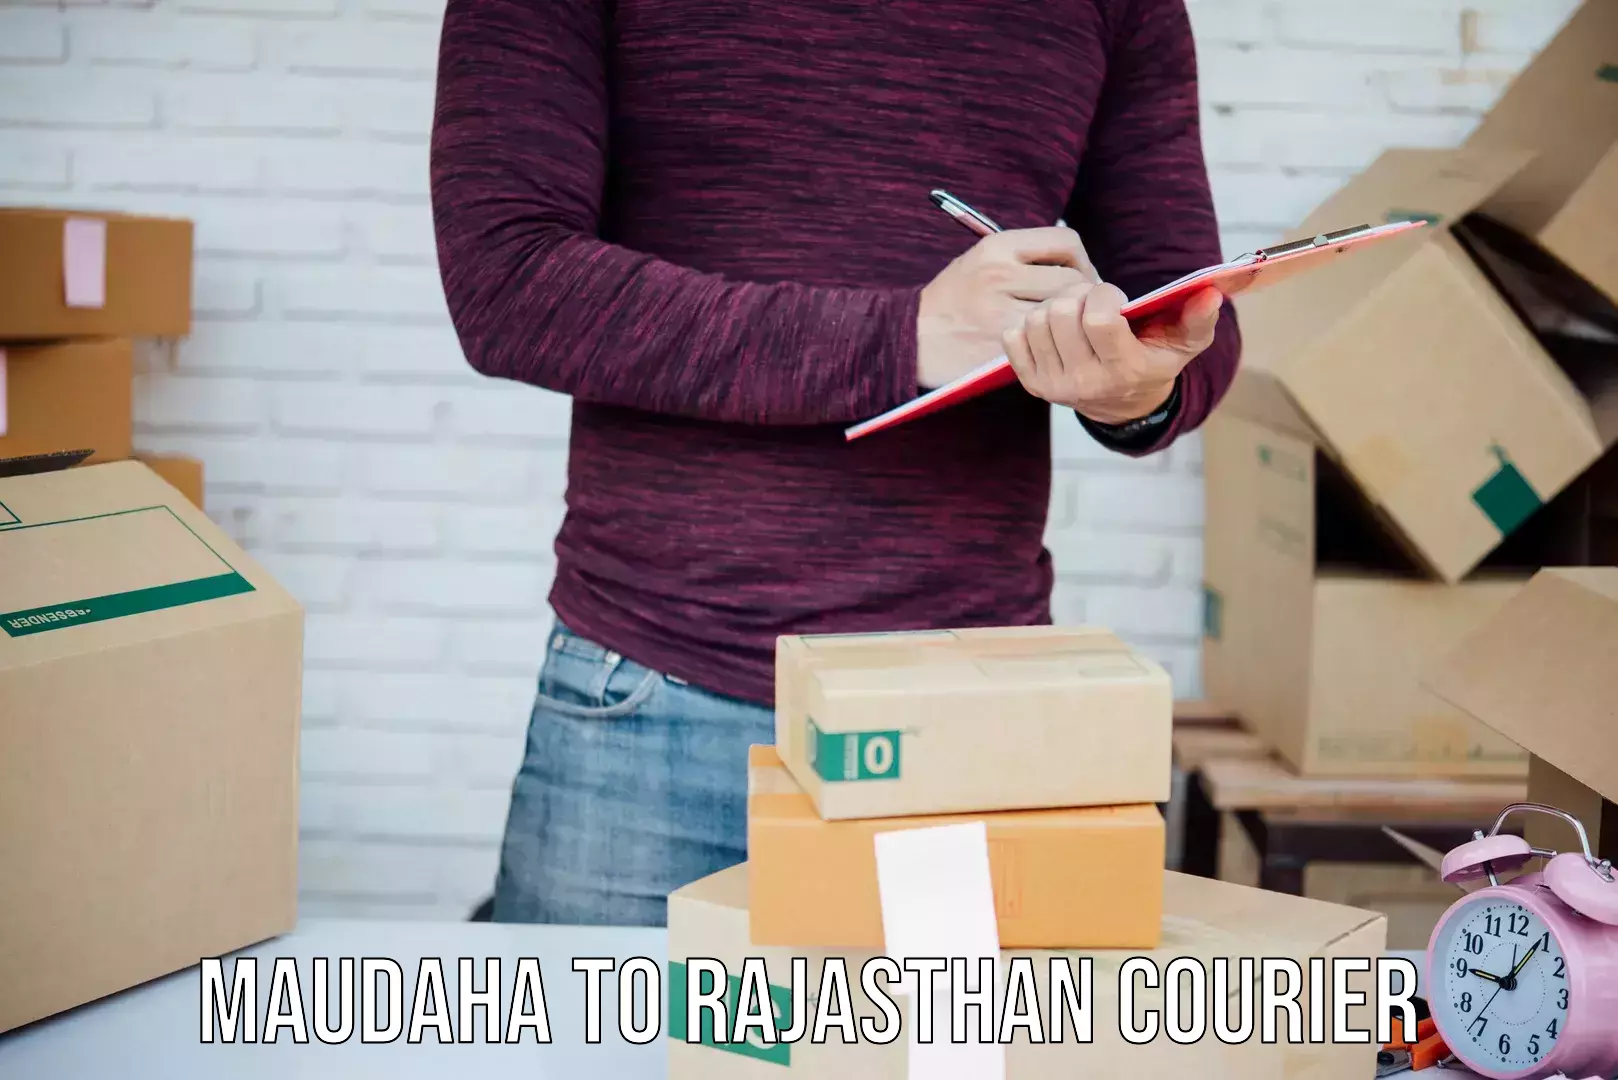 Easy access courier services in Maudaha to Rajasthan